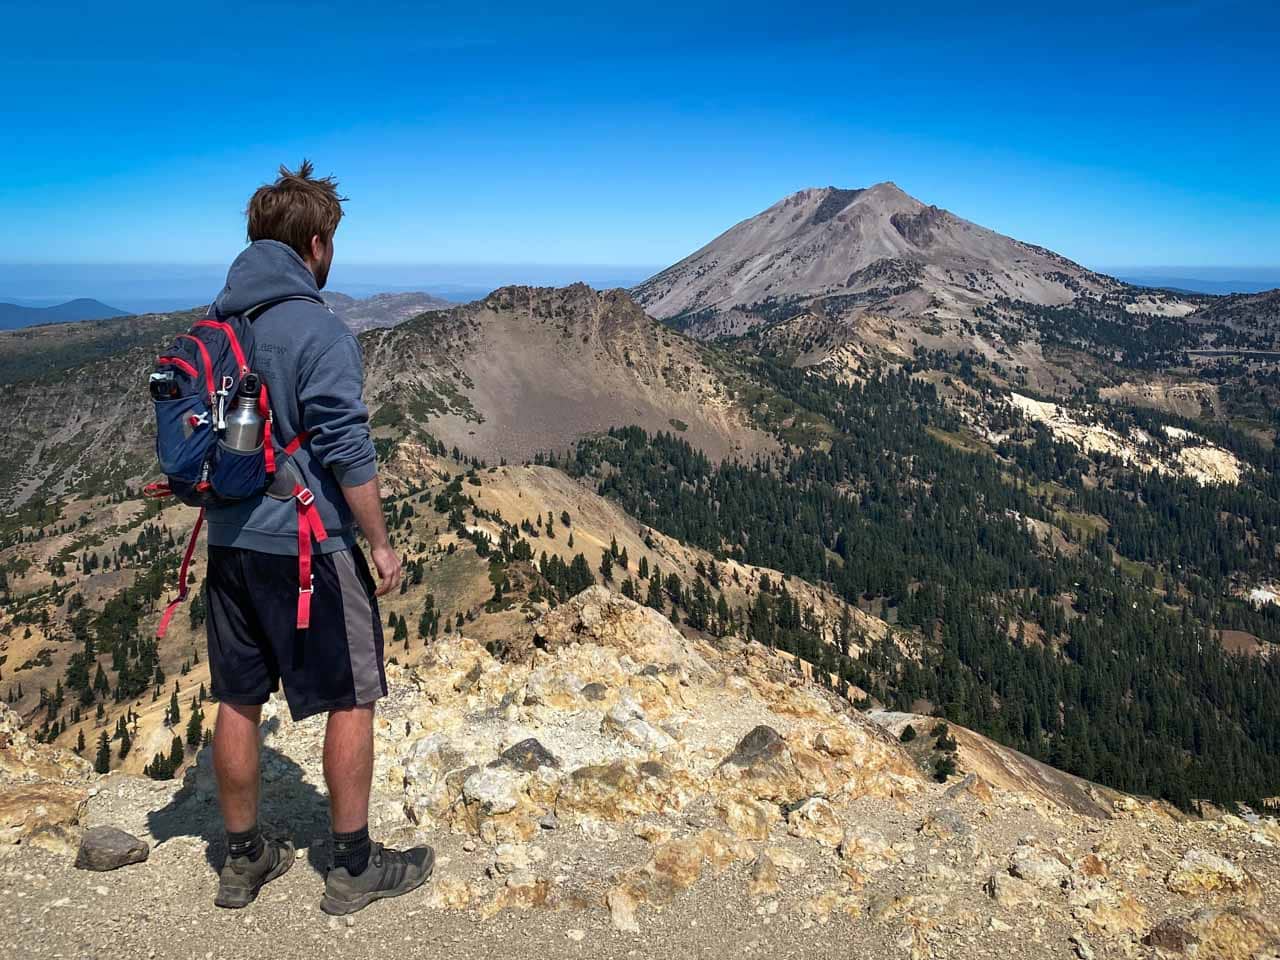 Brokeoff Mountain, hiking trails in Lassen Volcanic National Park